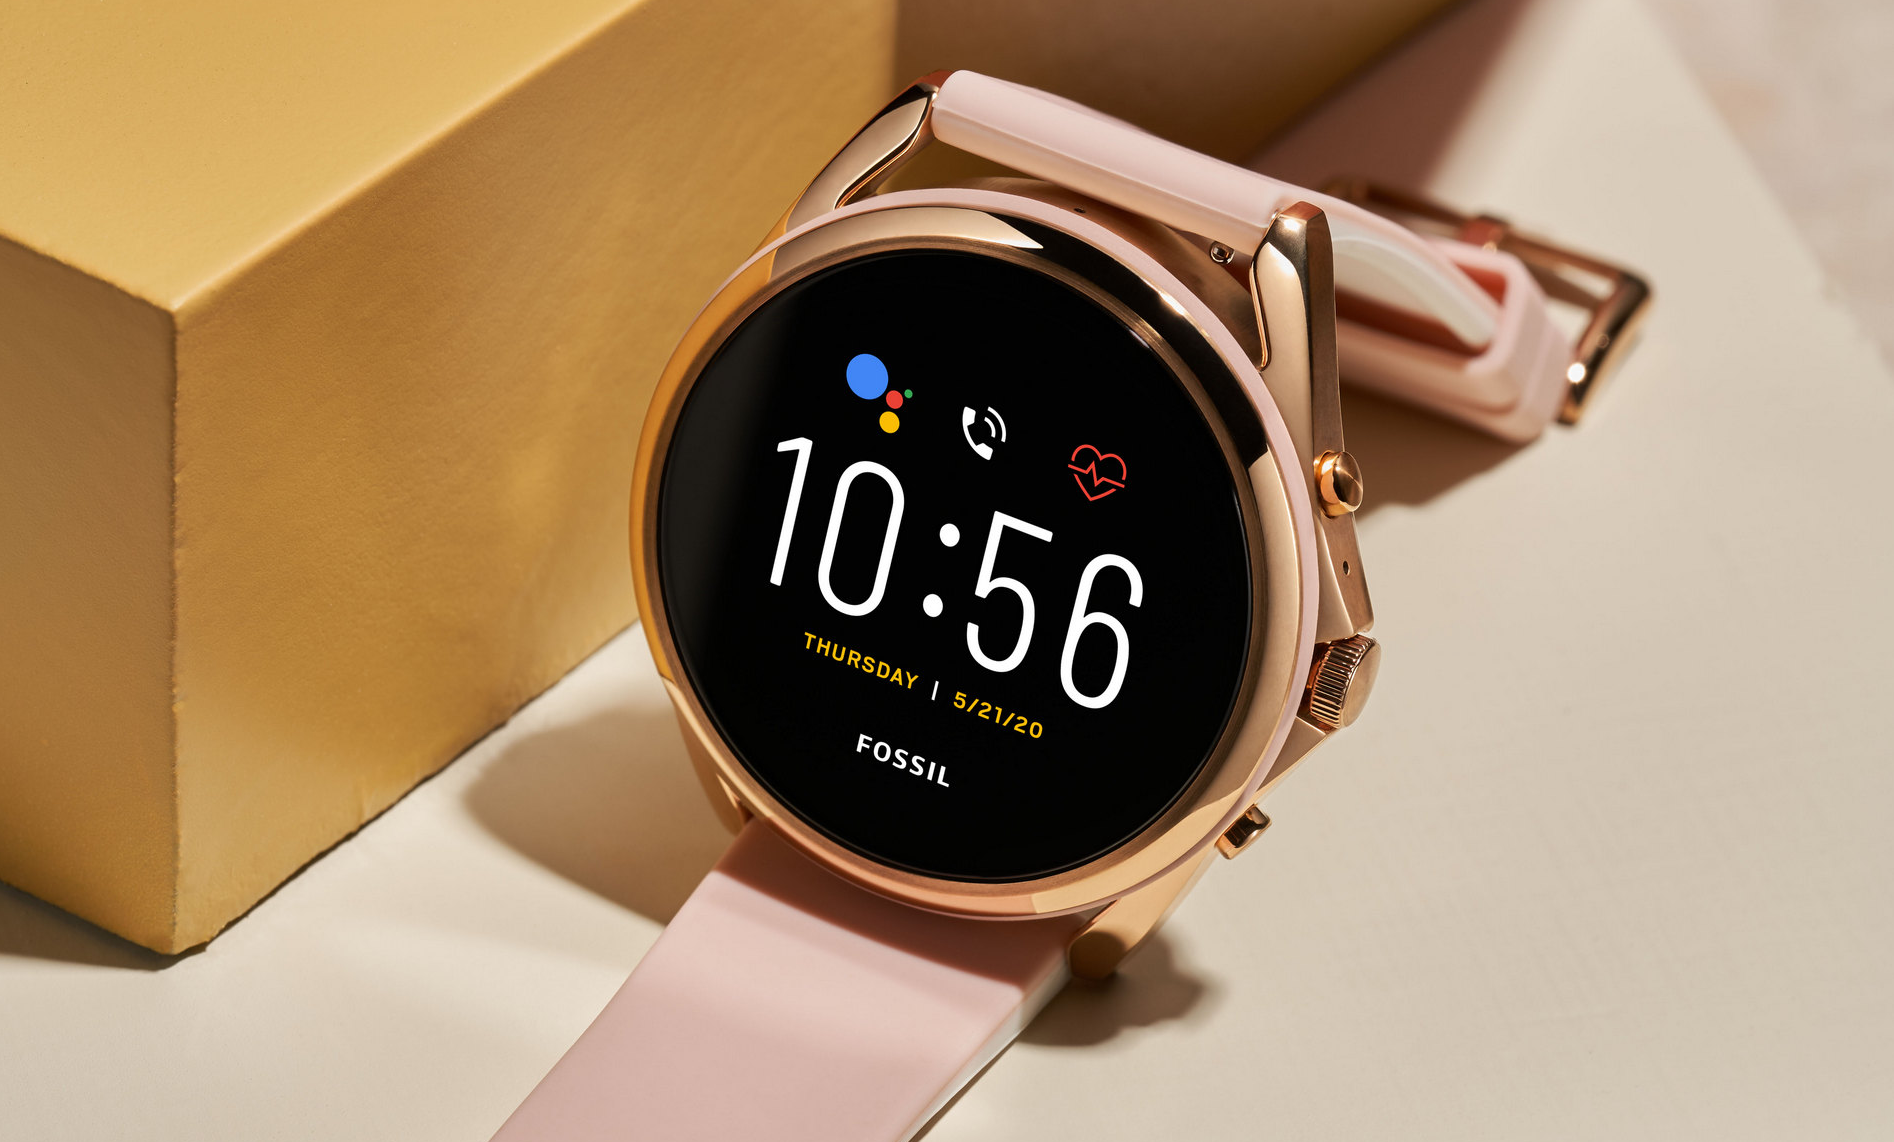 New Fossil Wear OS smartwatches appear at the FCC, likely the Fossil Gen 6  and a Michele or Michael Kors model  News